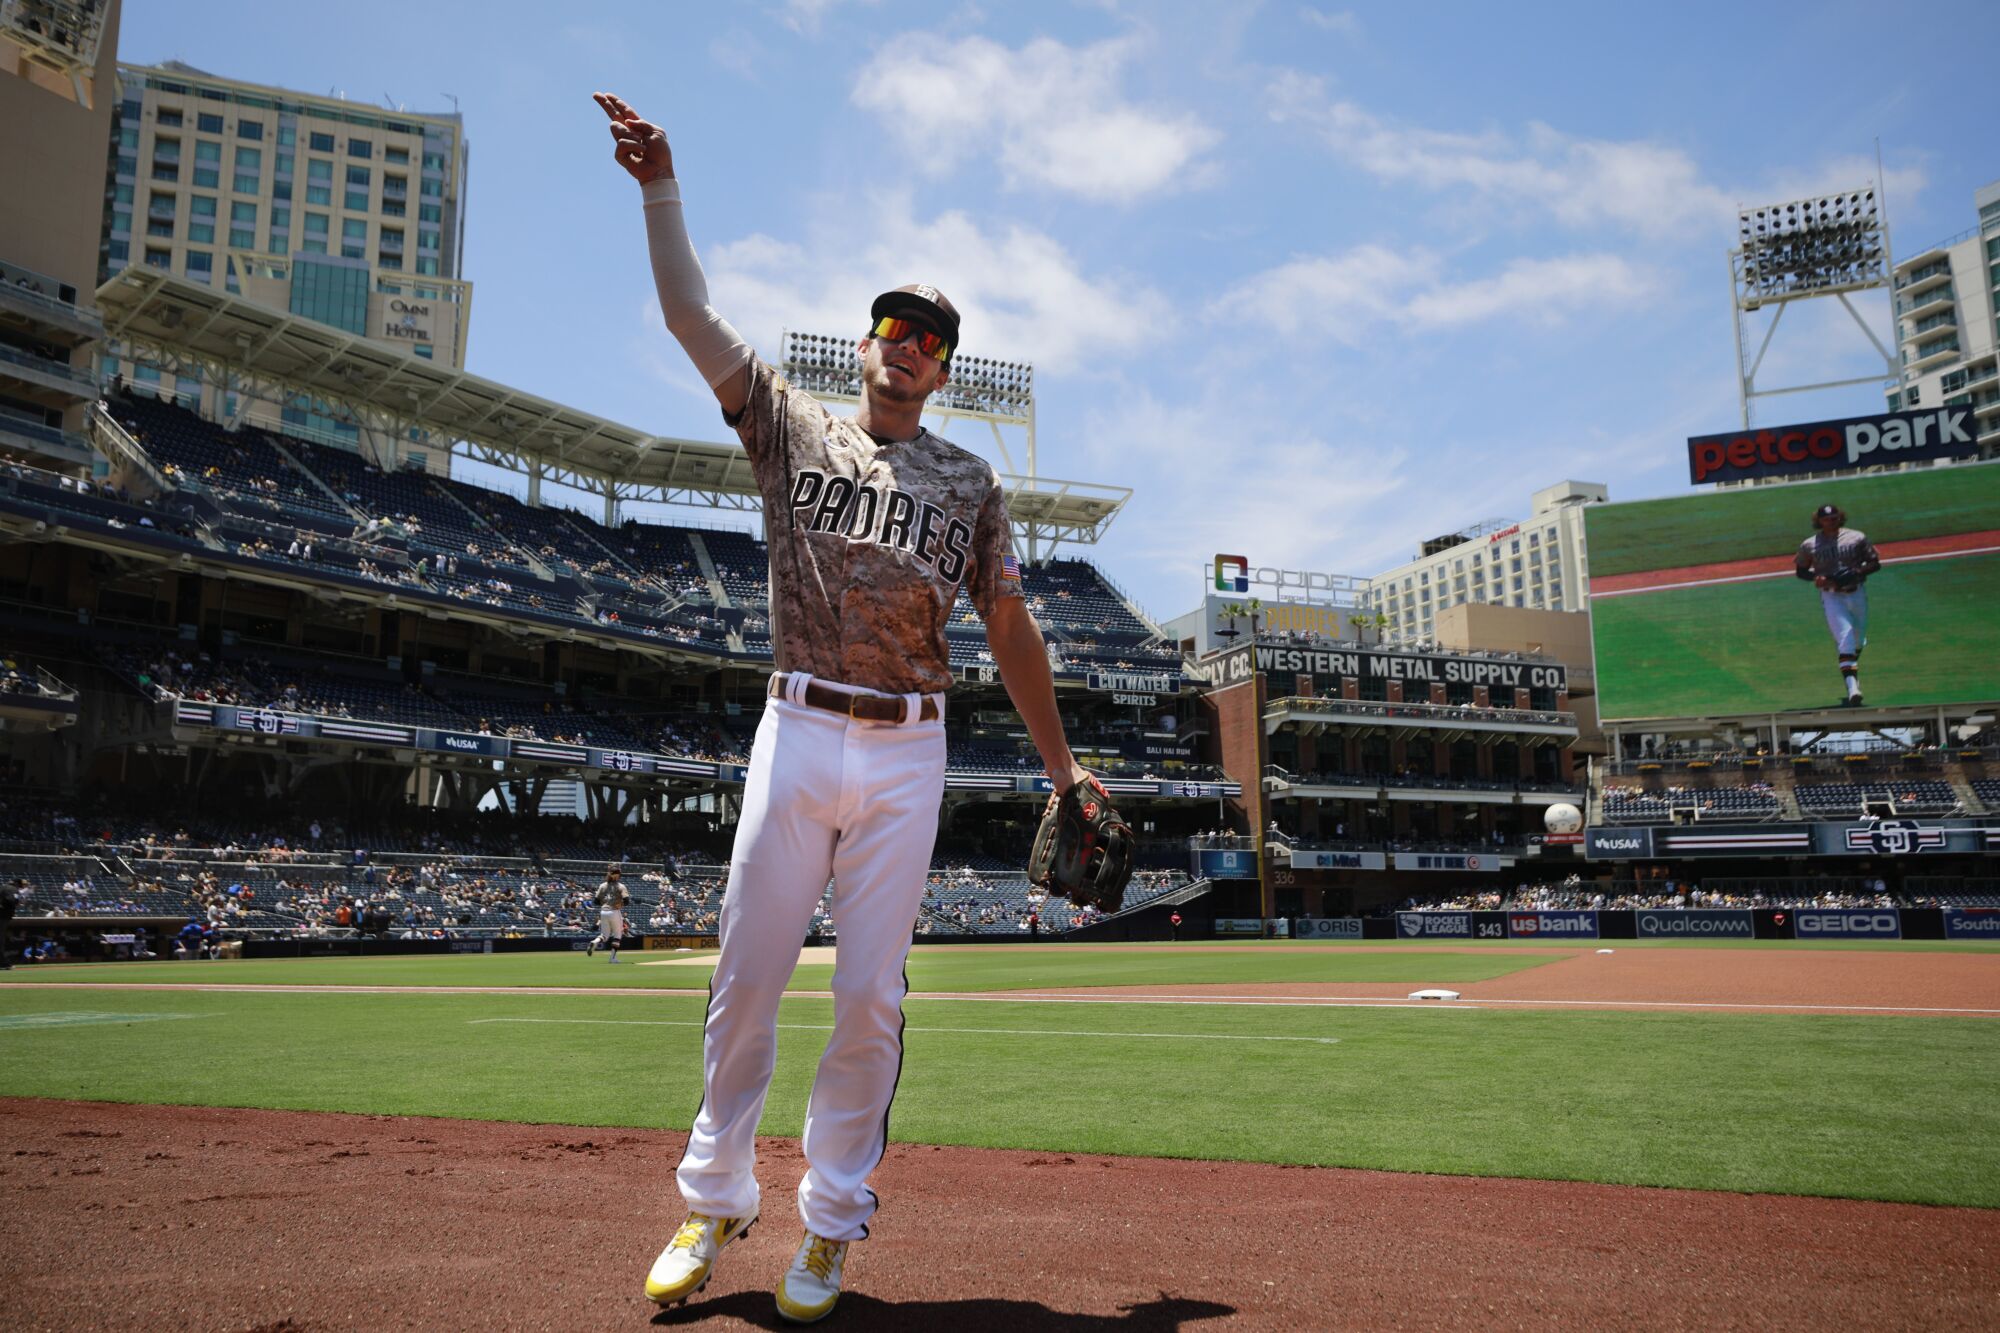 The San Diego Padres' Wil Myers signals to fans as he takes the field to play.